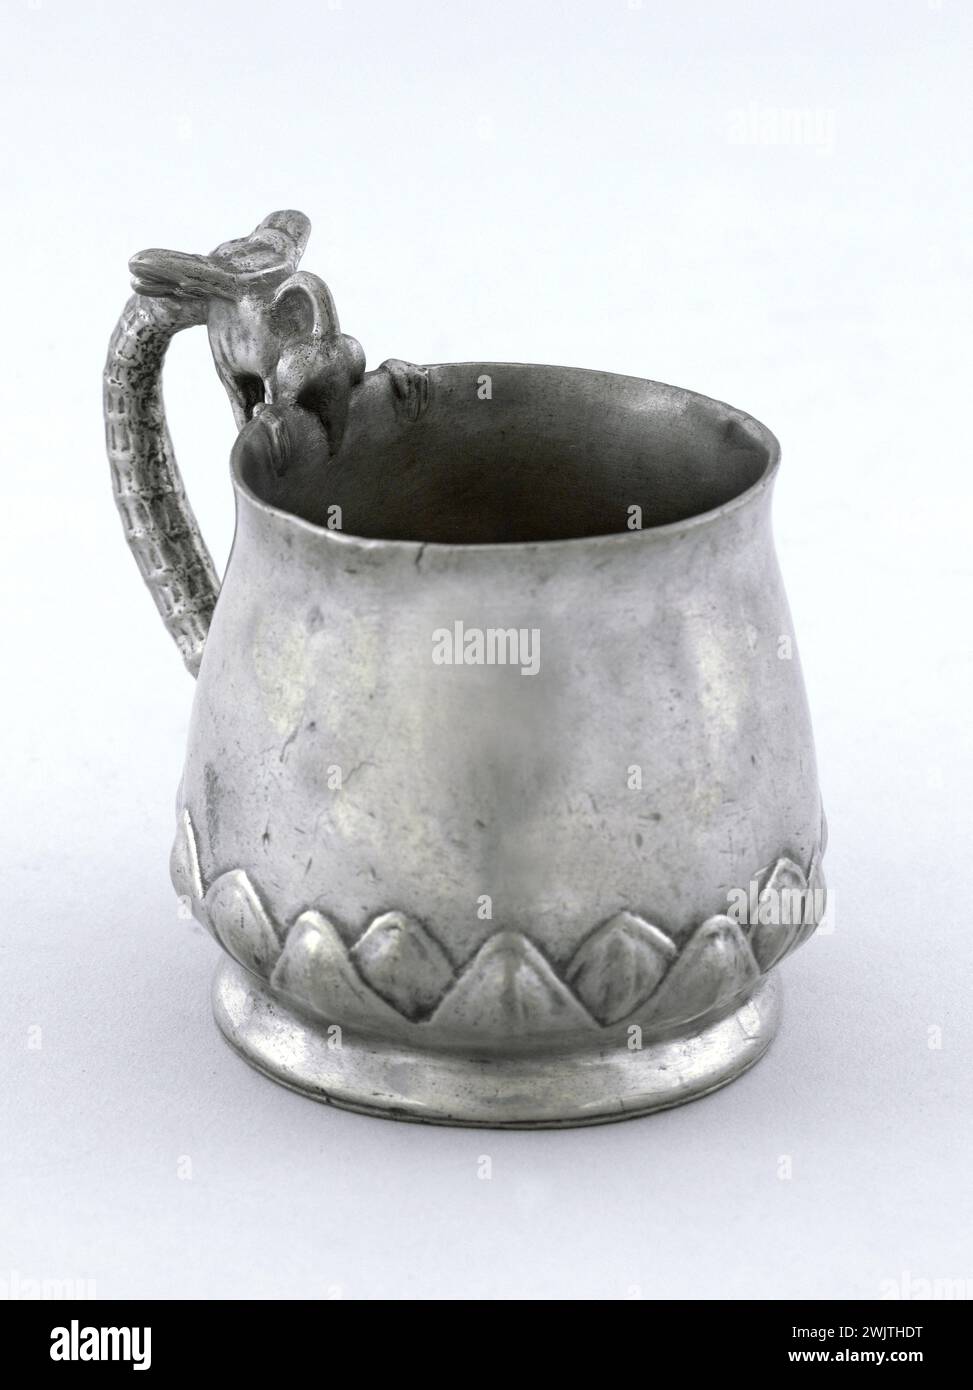 Jean Baffier (1851-1920). 'Cup'. Tin. 1898. Museum of Fine Arts of the City of Paris, Petit Palais. 57910-4 Anse, tin, goblet, wine service, dishes Stock Photo